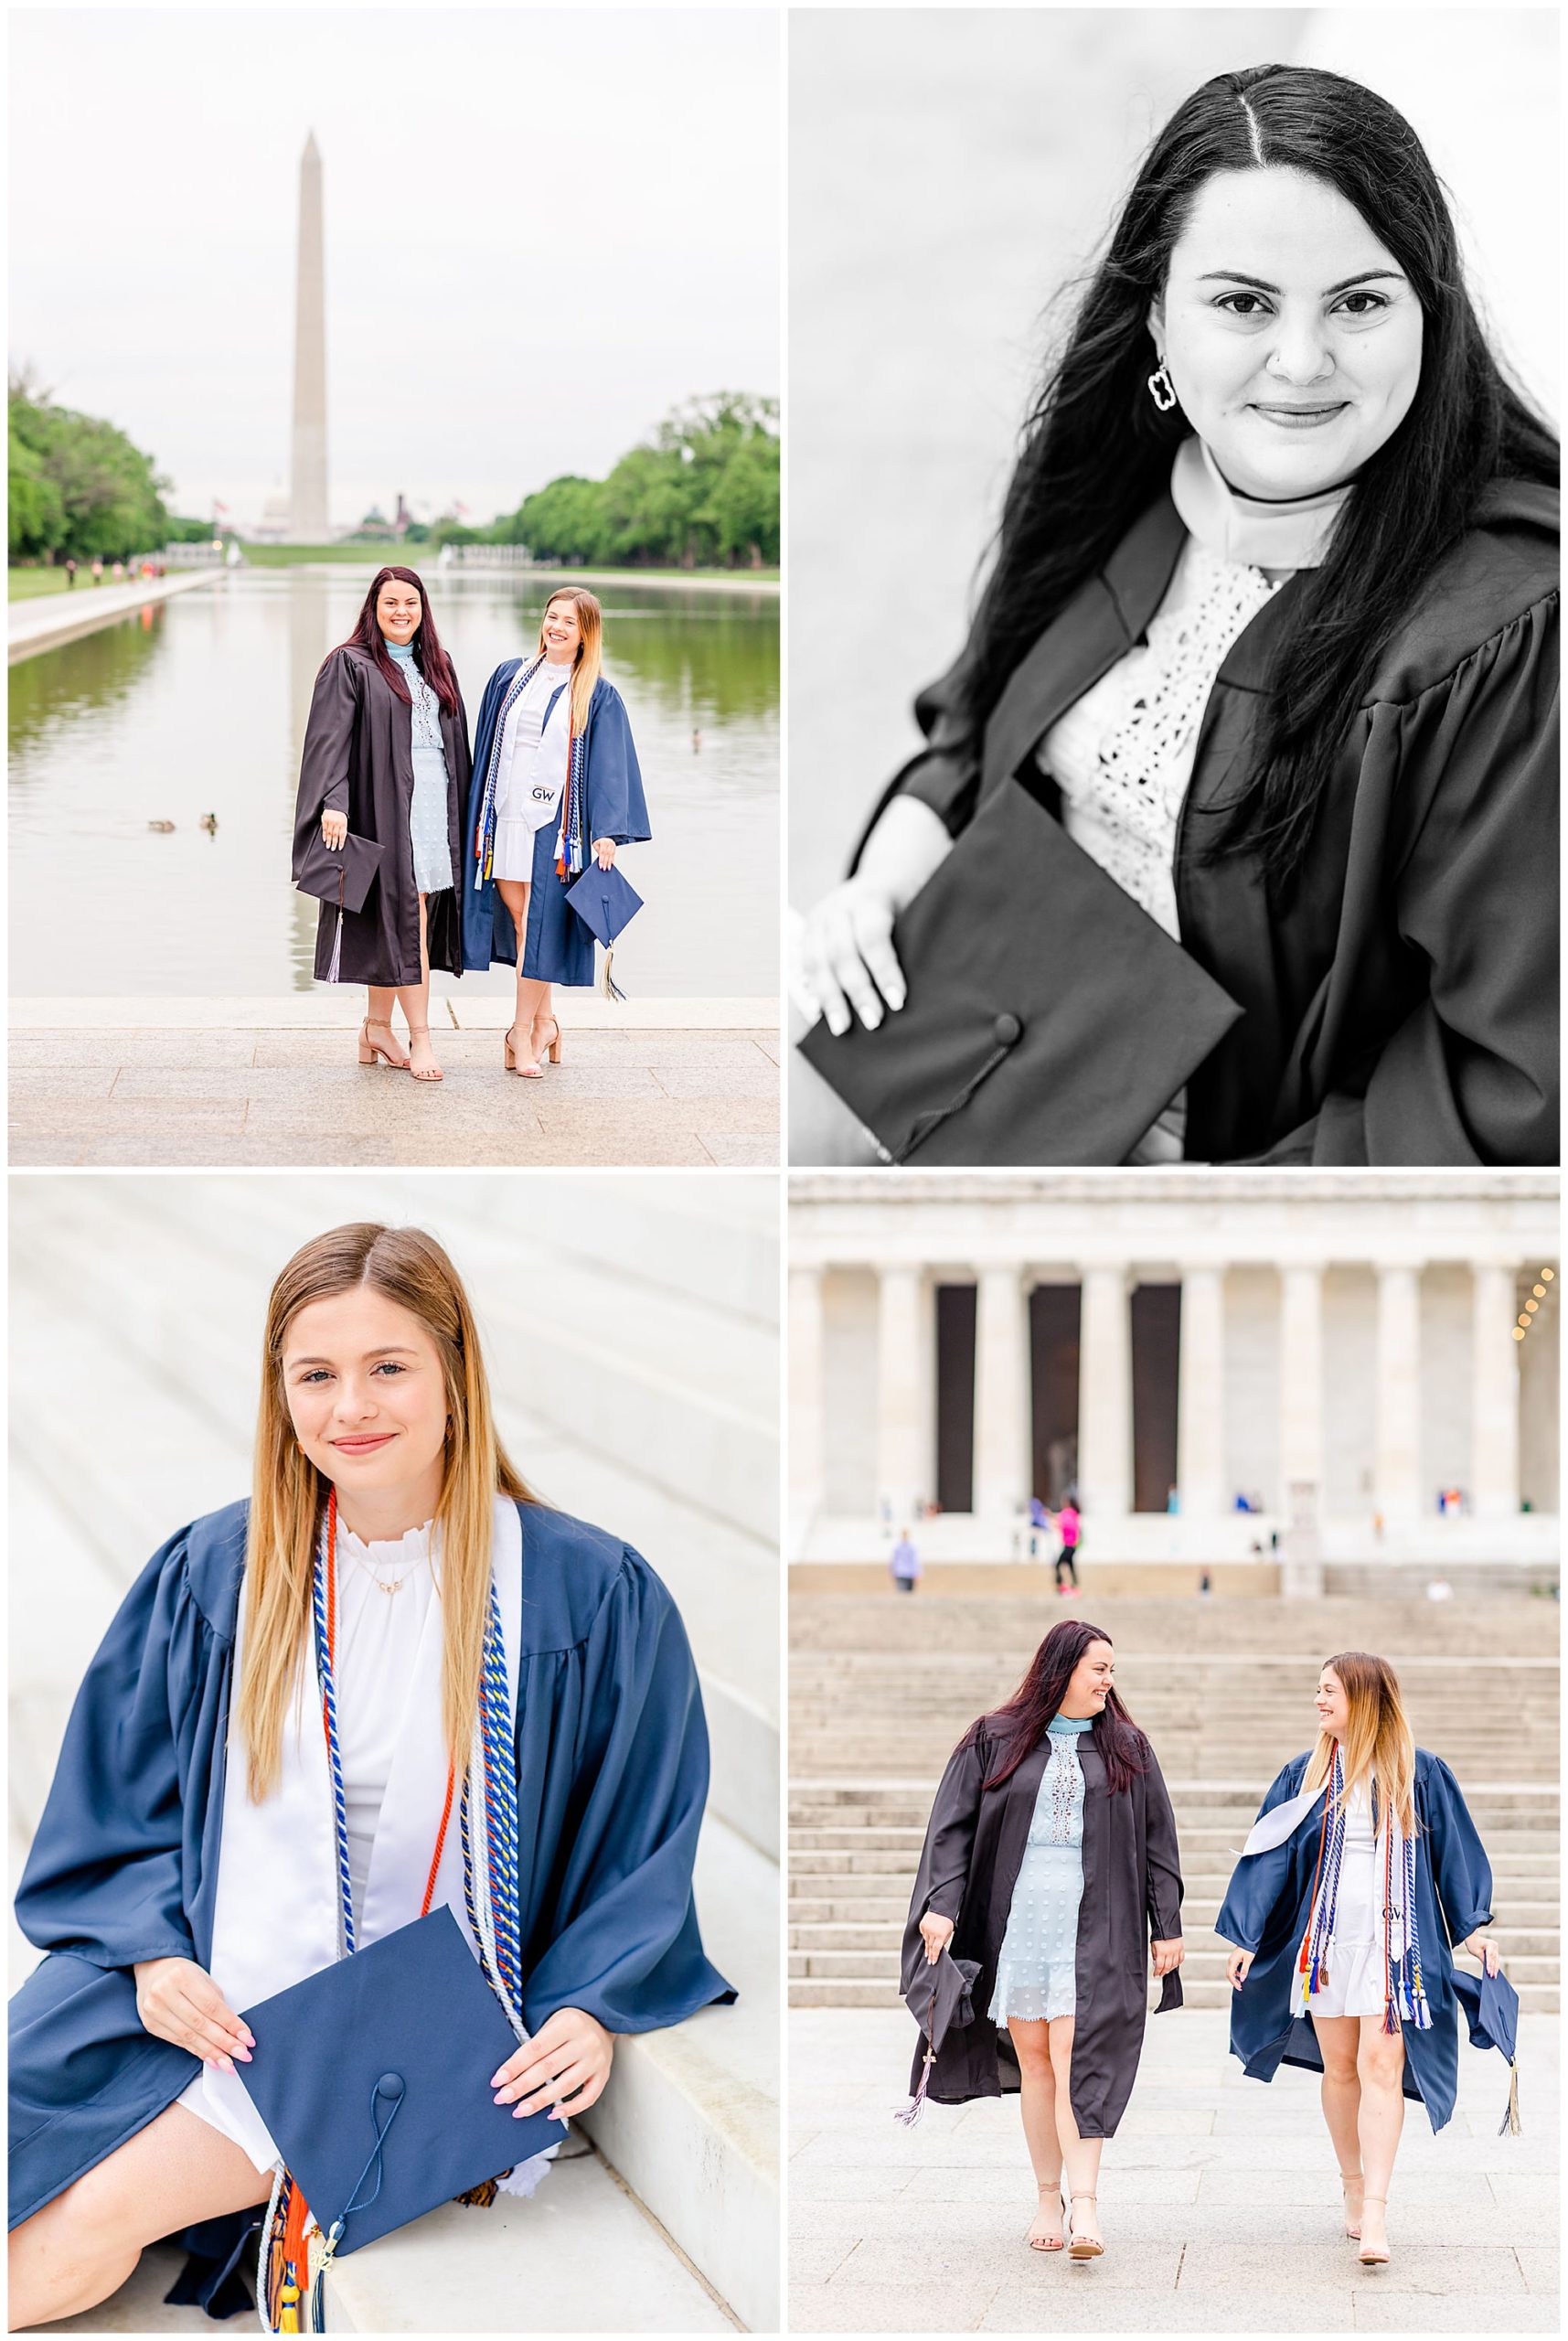 sister graduation photo session, Lincoln Memorial graduation photos, sibling graduation photos, magic hour graduation photos, Washington D.C. graduation photos, D.C graduates, Rachel E.H. Photographer, D.C. graduation photographer, black and white, woman sitting on steps of Lincoln memorial, sisters looking at each other, women walking towards camera